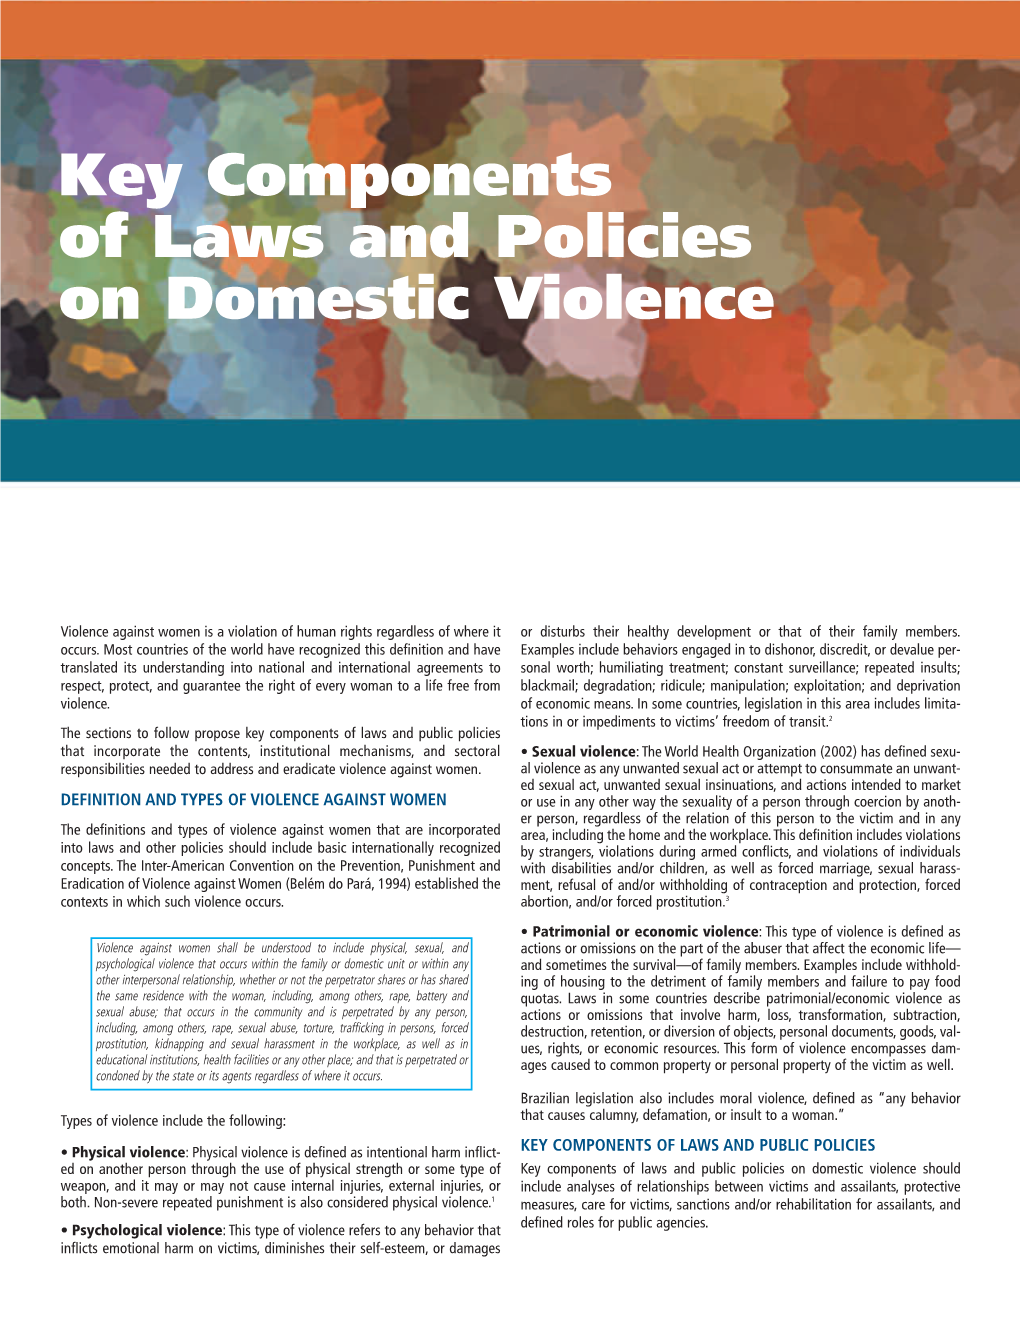 Key Components of Laws and Policies on Domestic Violence